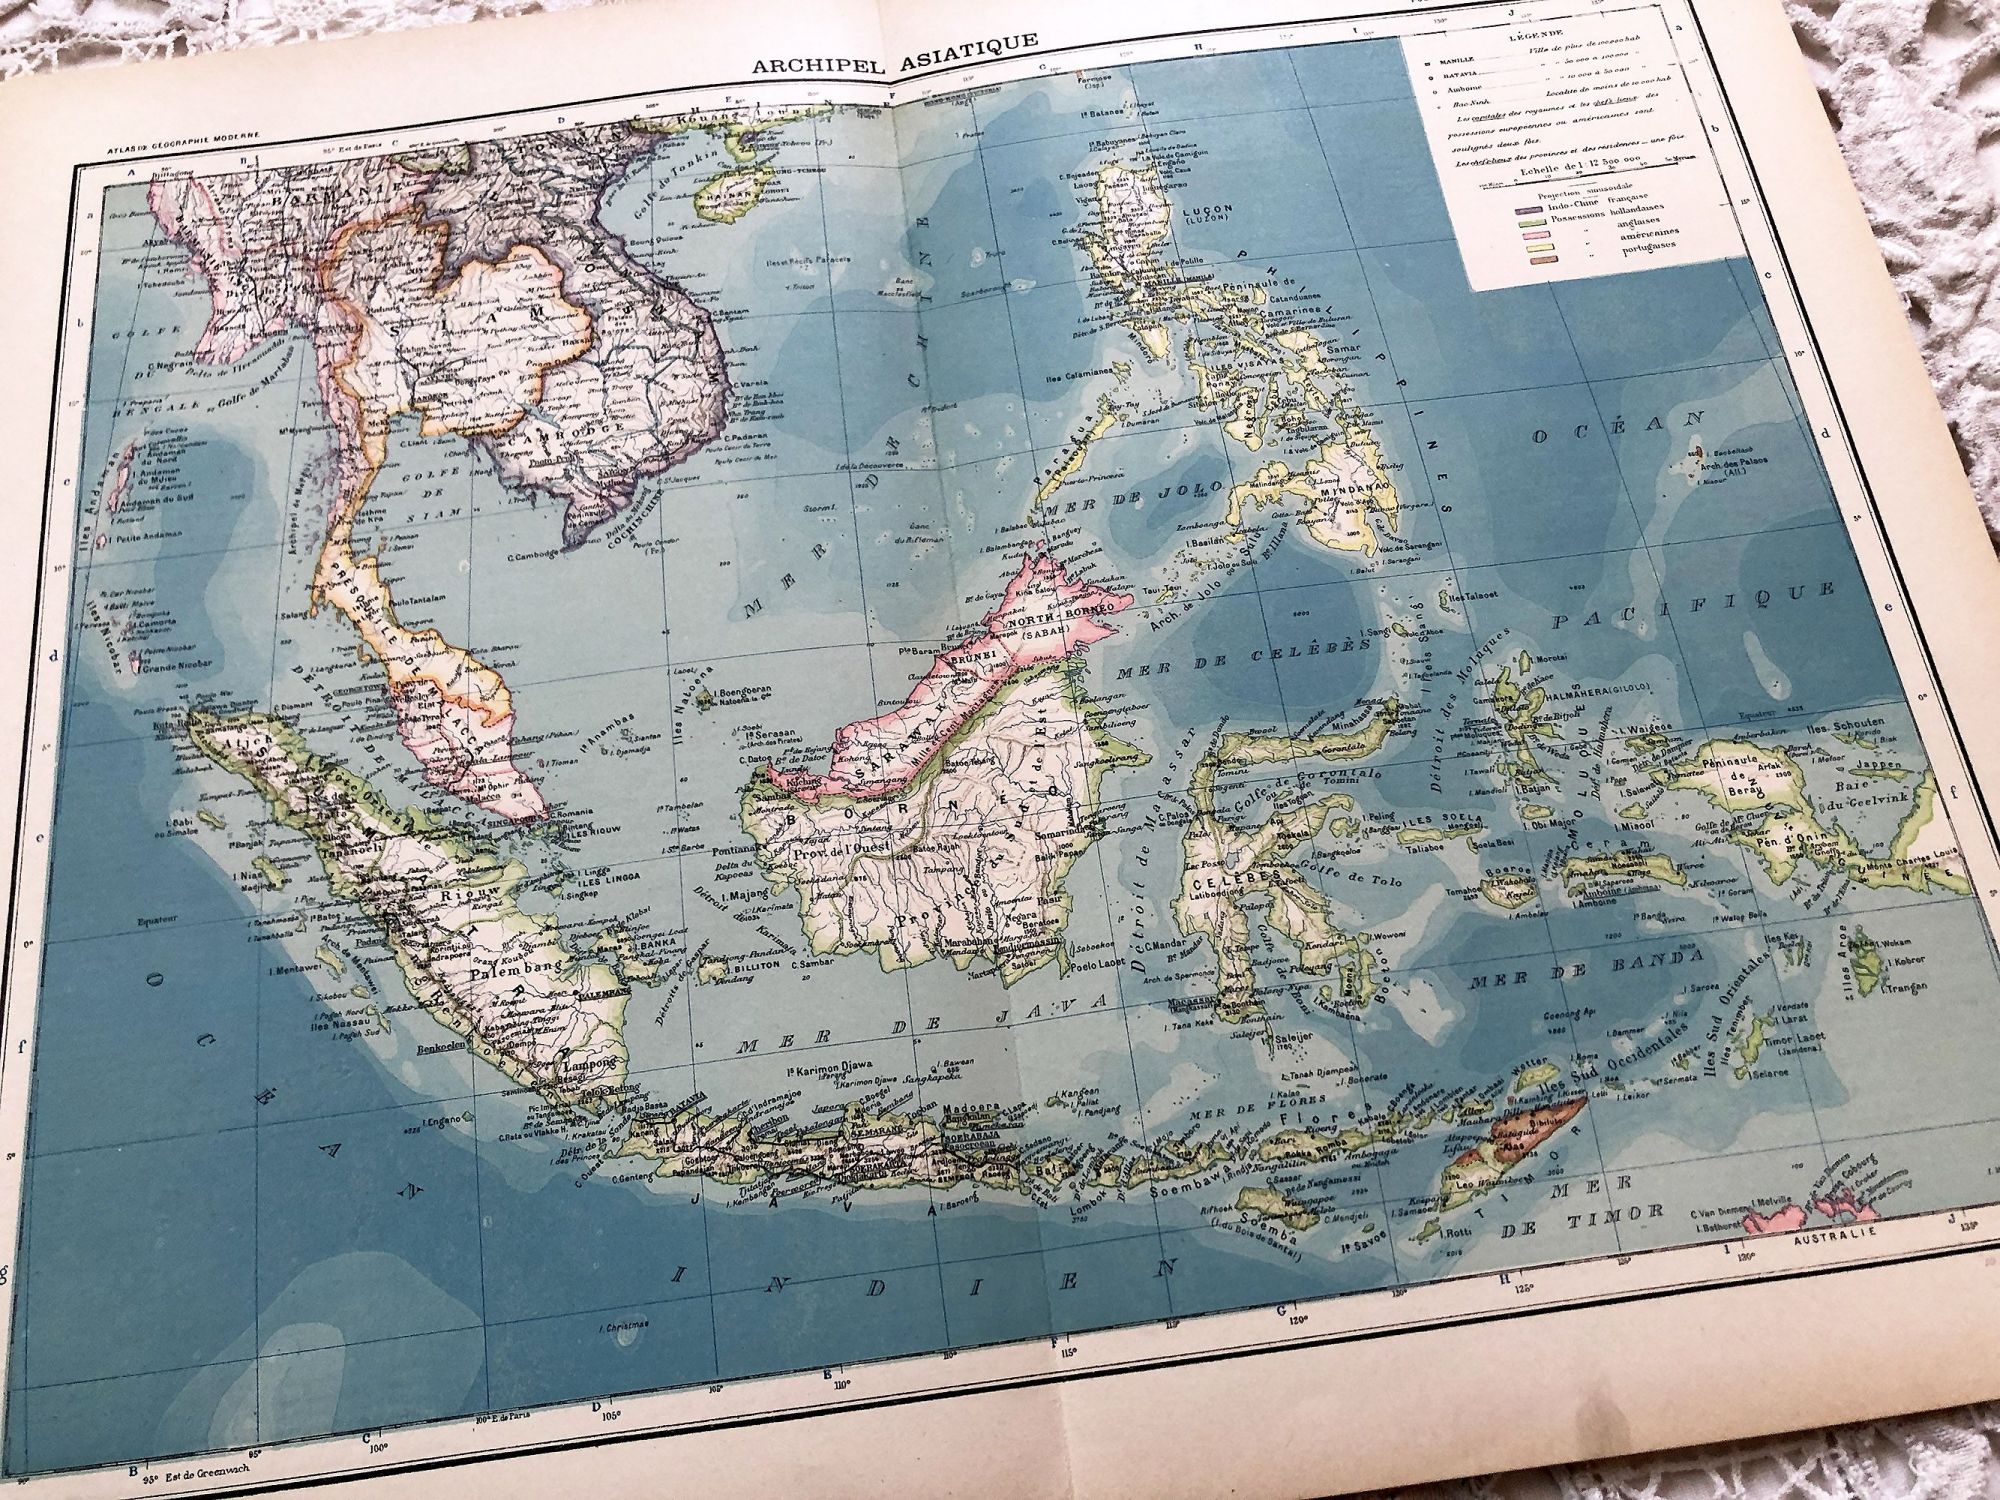 Large vintage map of the Asian archipelago (Indonesia, Singapore, etc.) from a French atlas of the 1910s